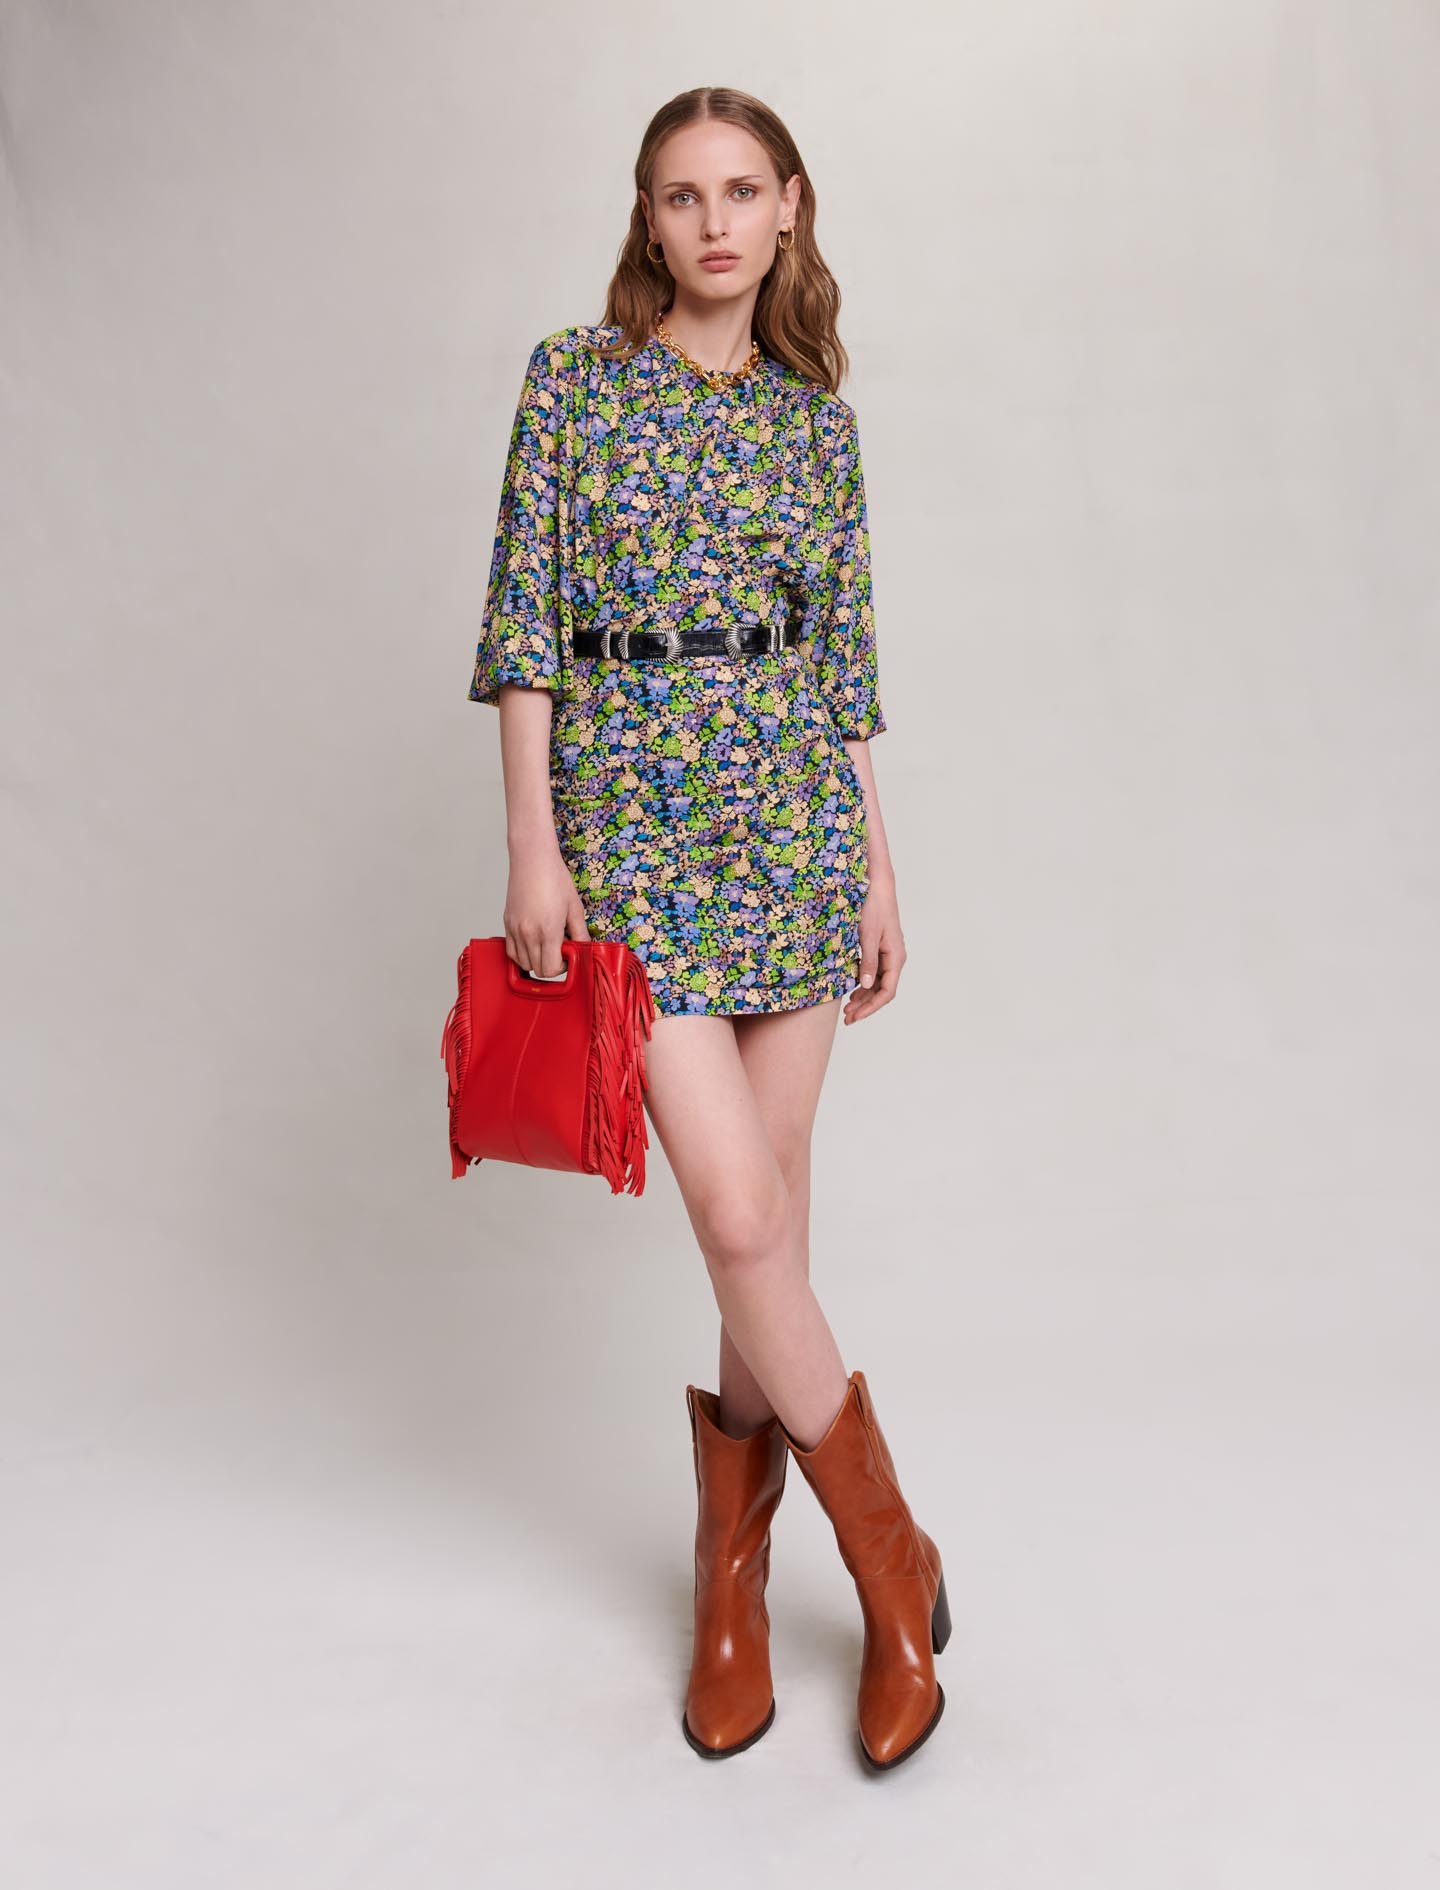 Maje Woman's polyester Lining: 123RISOLEUR for Fall/Winter, in color Primroses Multico Print /